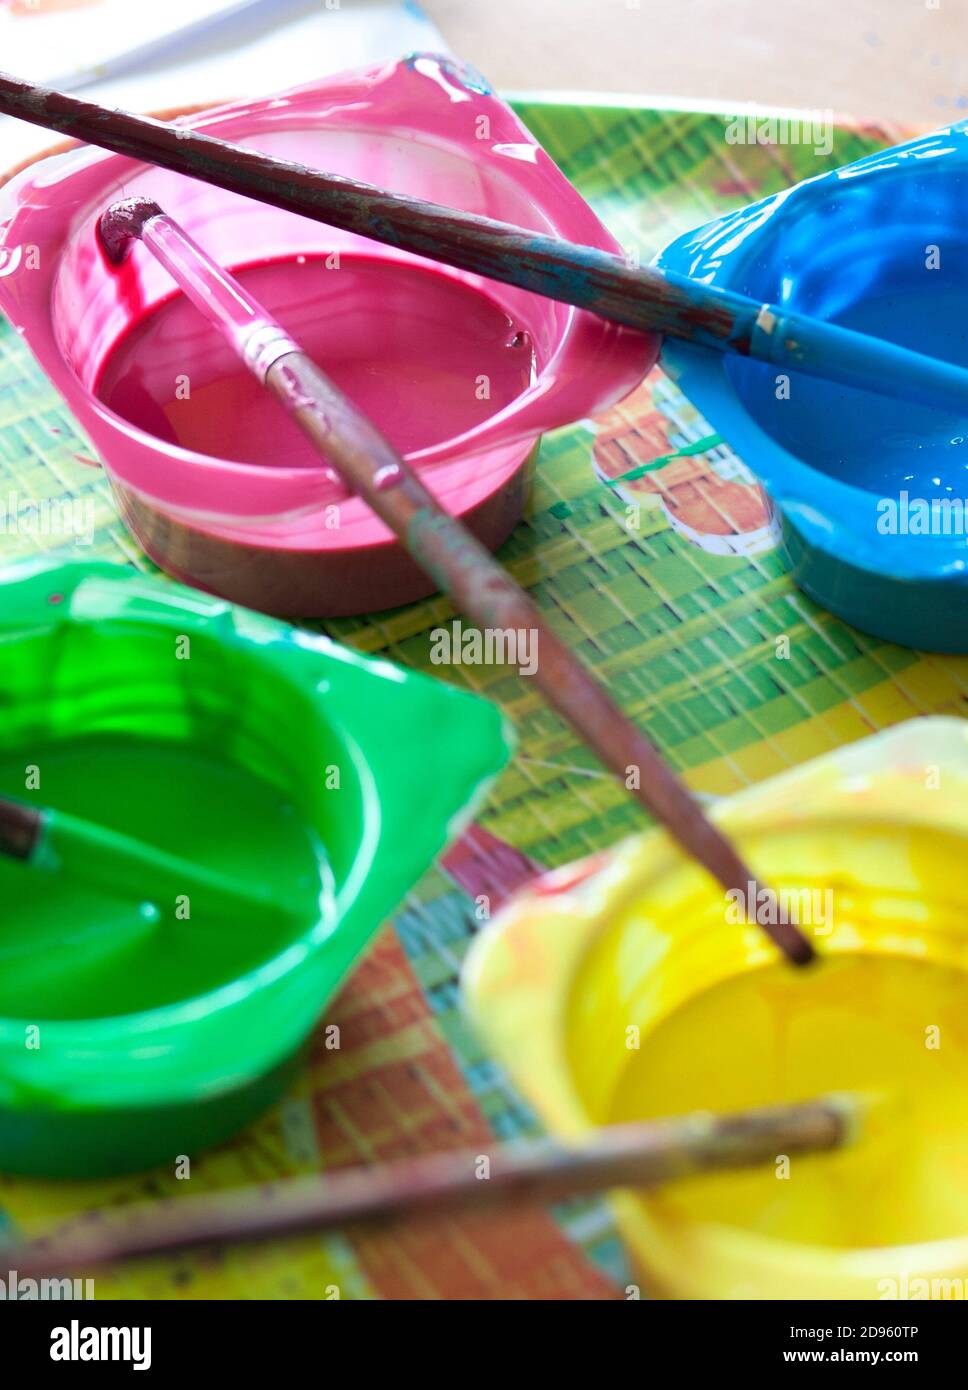 Washable Tempera and rounded paint brushes. Yogurt cups reused as paint containers. Stock Photo